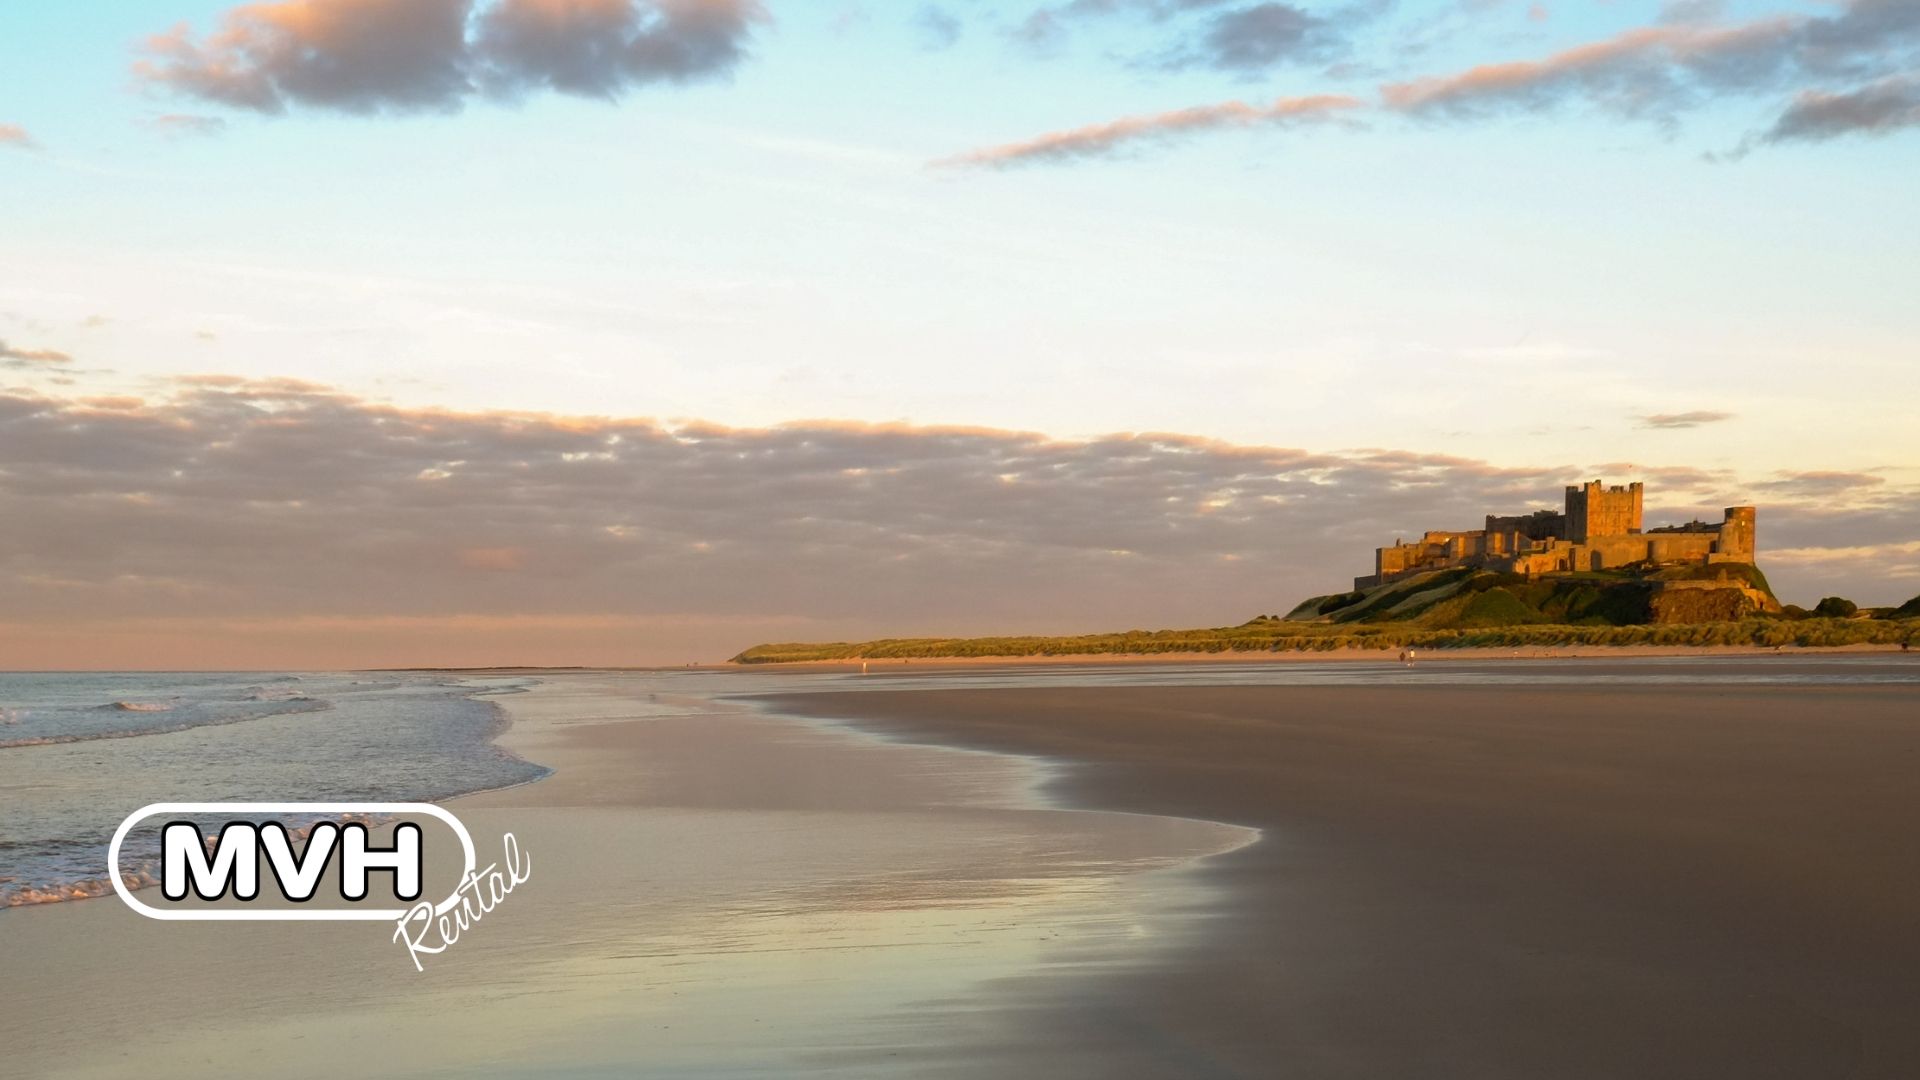 The northeast of England boasts some stunning beaches. Thinking of exploring our corner of the world? Here are a few of our favourite seaside retreats.